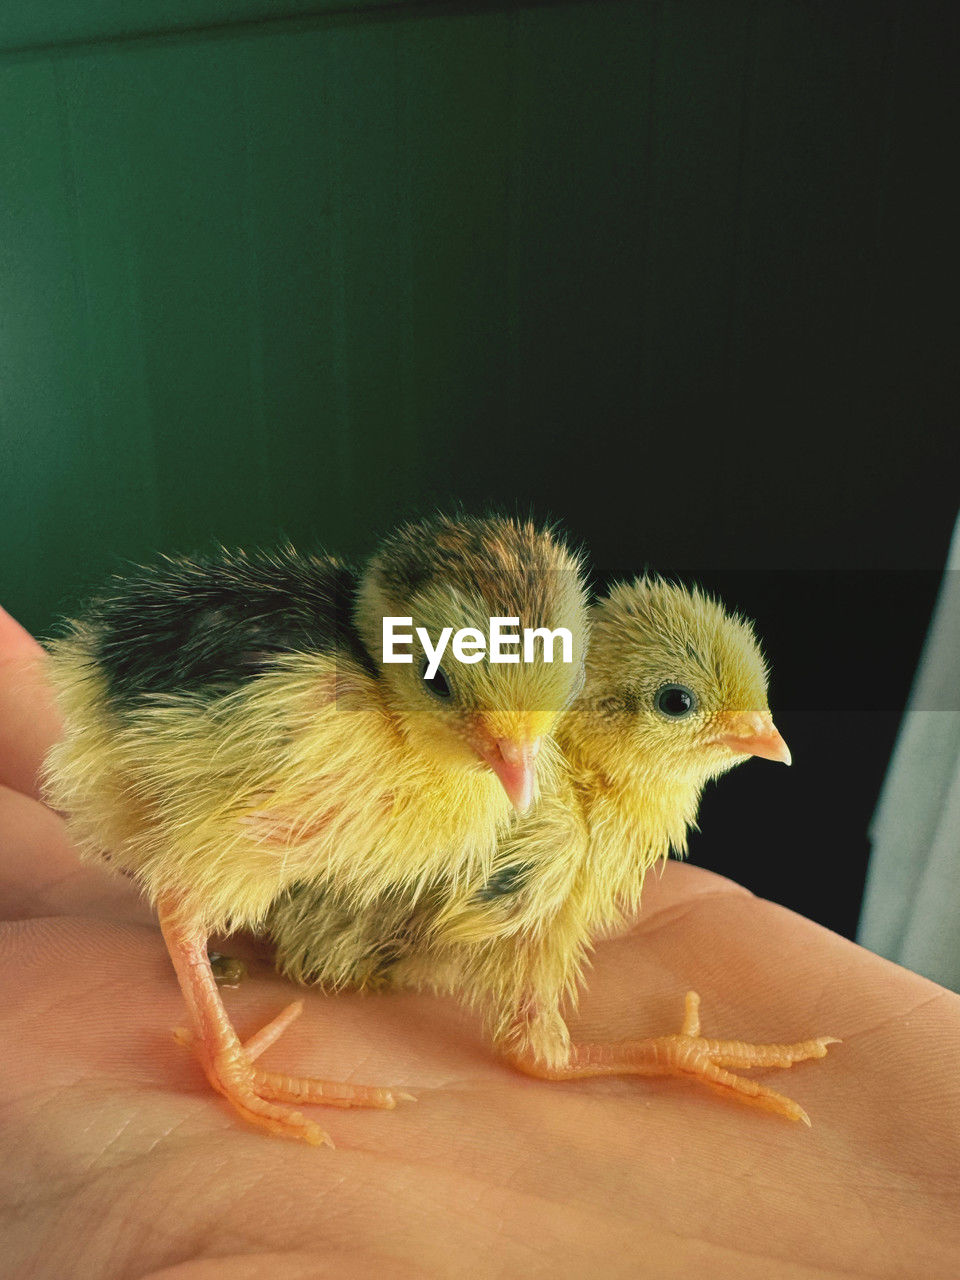 animal themes, animal, hand, bird, pet, young bird, young animal, domestic animals, beak, yellow, holding, baby chicken, livestock, chicken, close-up, indoors, mammal, one person, one animal, cute, focus on foreground, finger